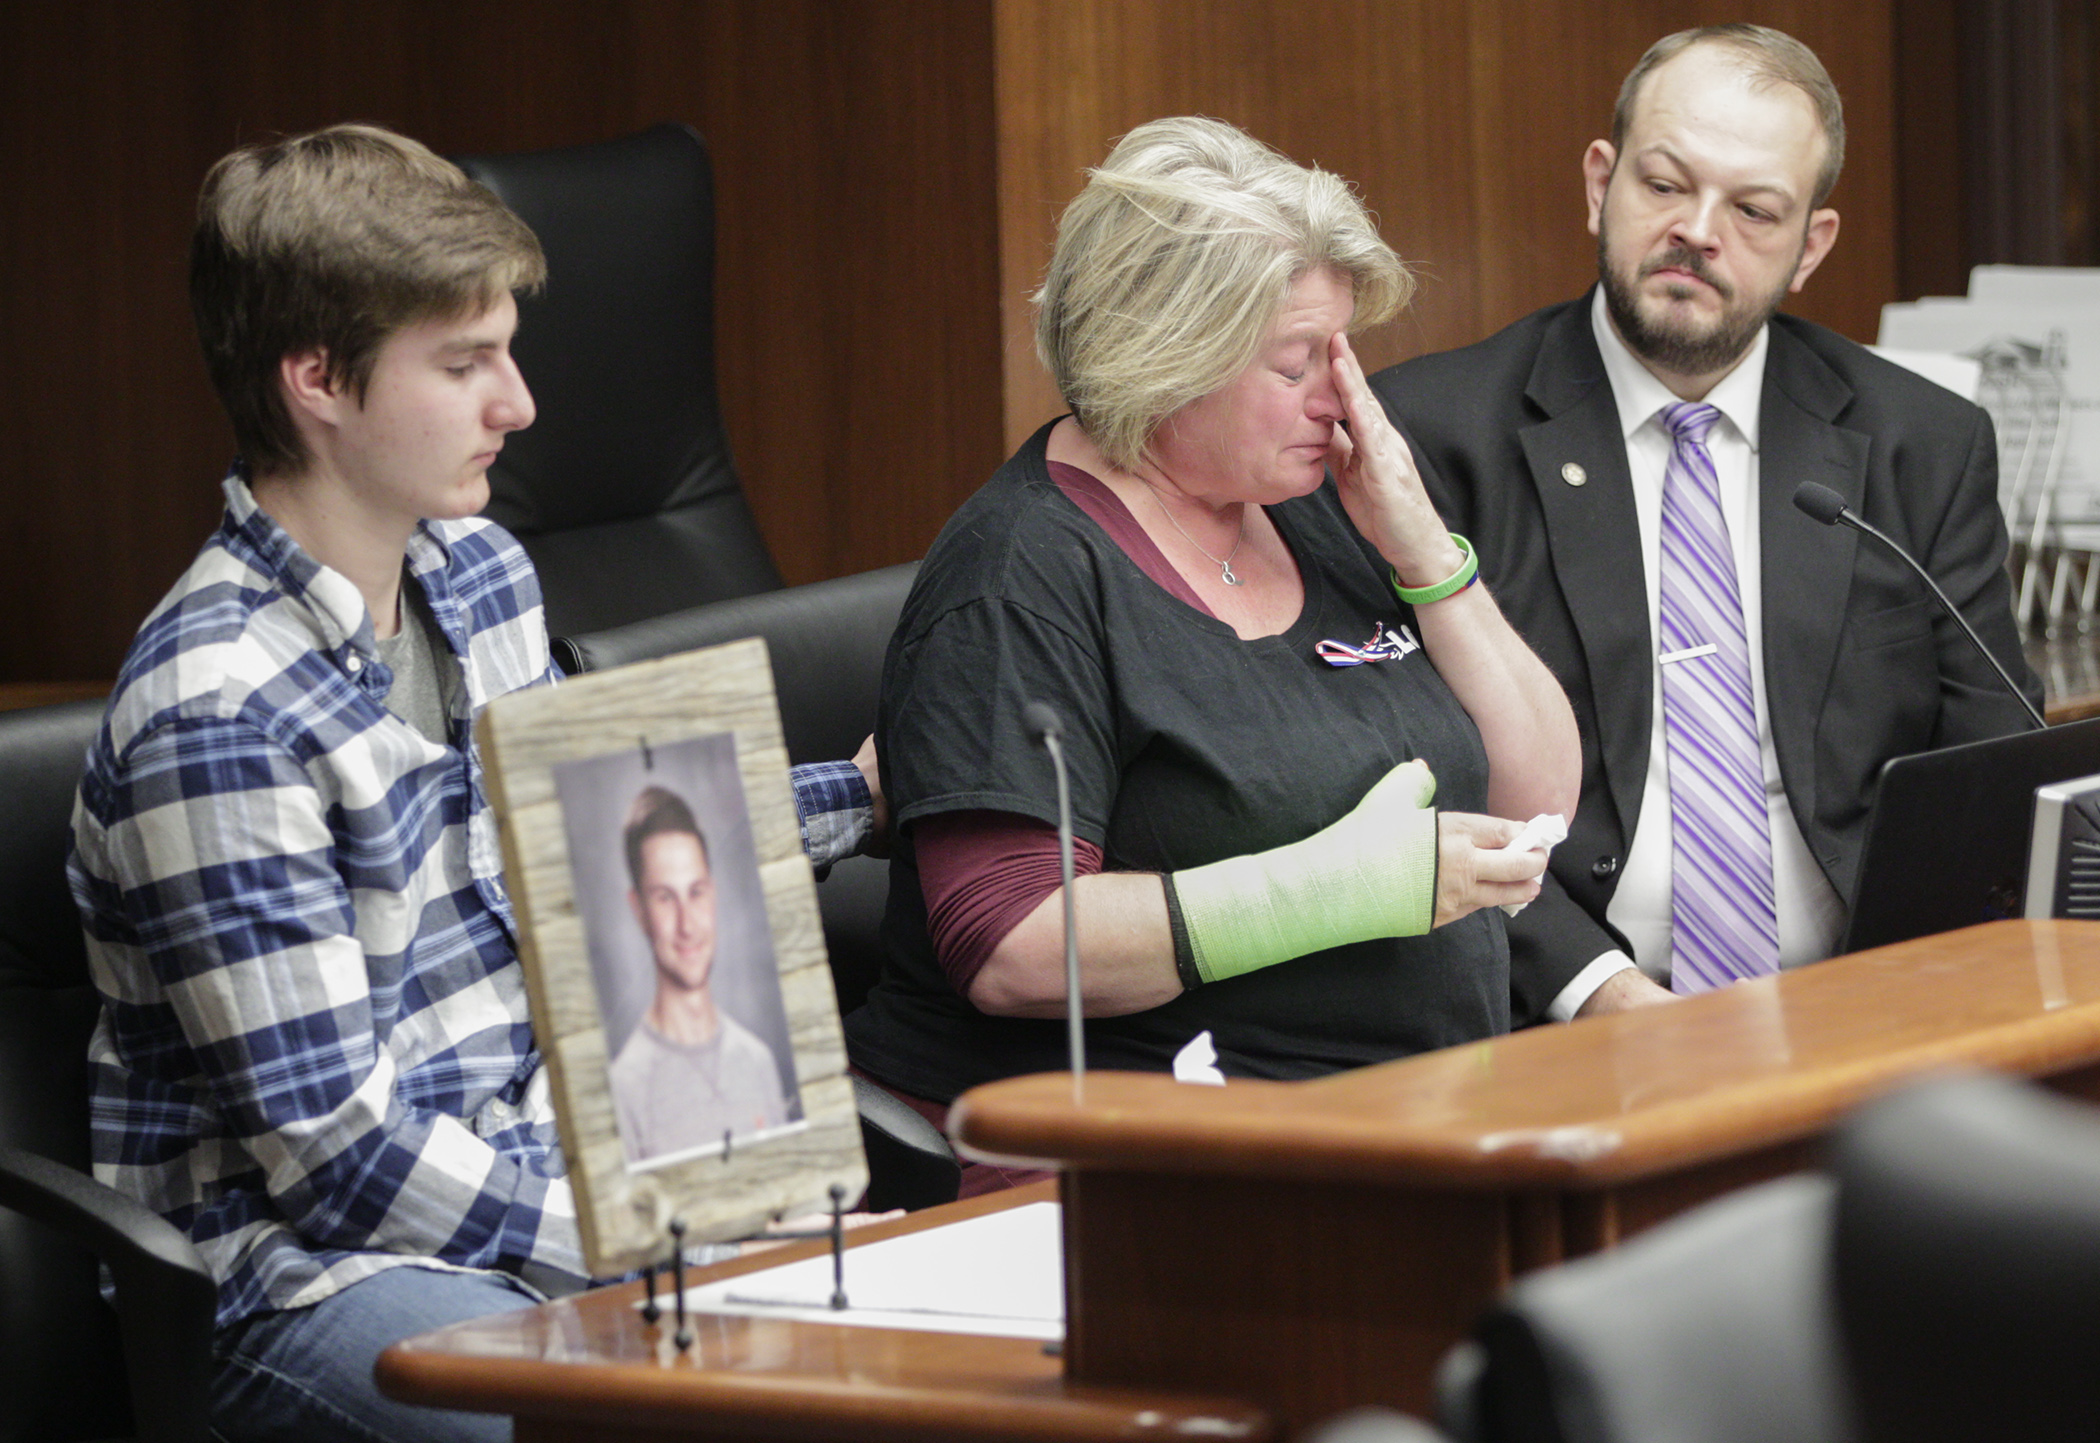 Michele Gran, whose 18-year-old son, Landon, was killed in an August 2019 farm accident, provides emotional testimony Feb. 20 to the House Agriculture and Food Finance and Policy Division. A bill sponsored by Rep. Jeff Brand, right, seeks to establish a farm safety grant program. Photo by Paul Battaglia